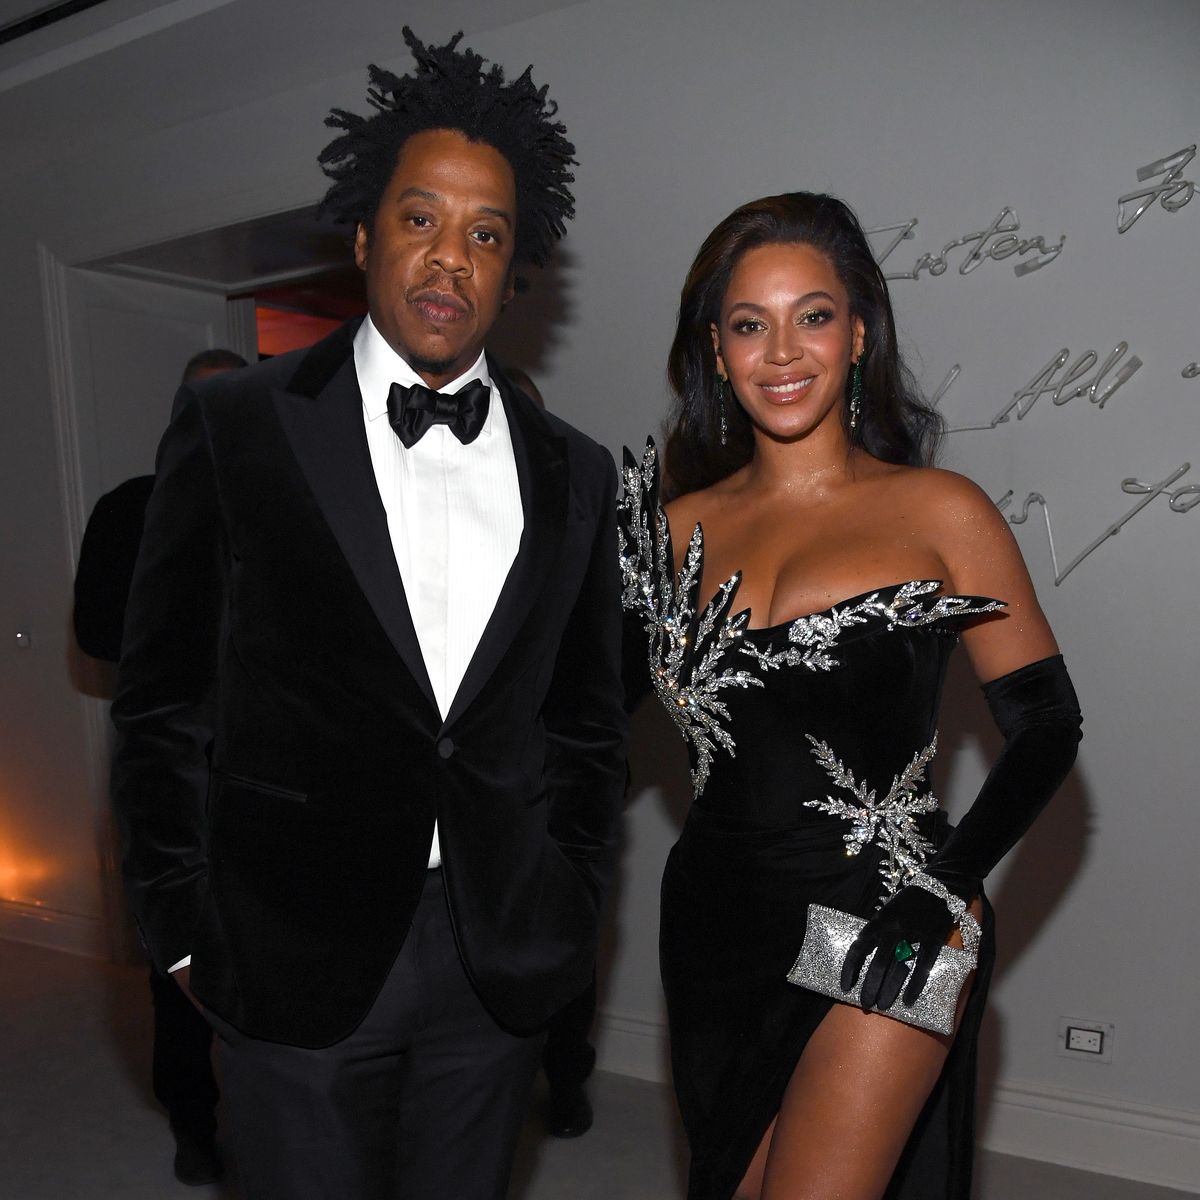 The Symbolism in Jay-Z's Choice of Champagne - The Atlantic